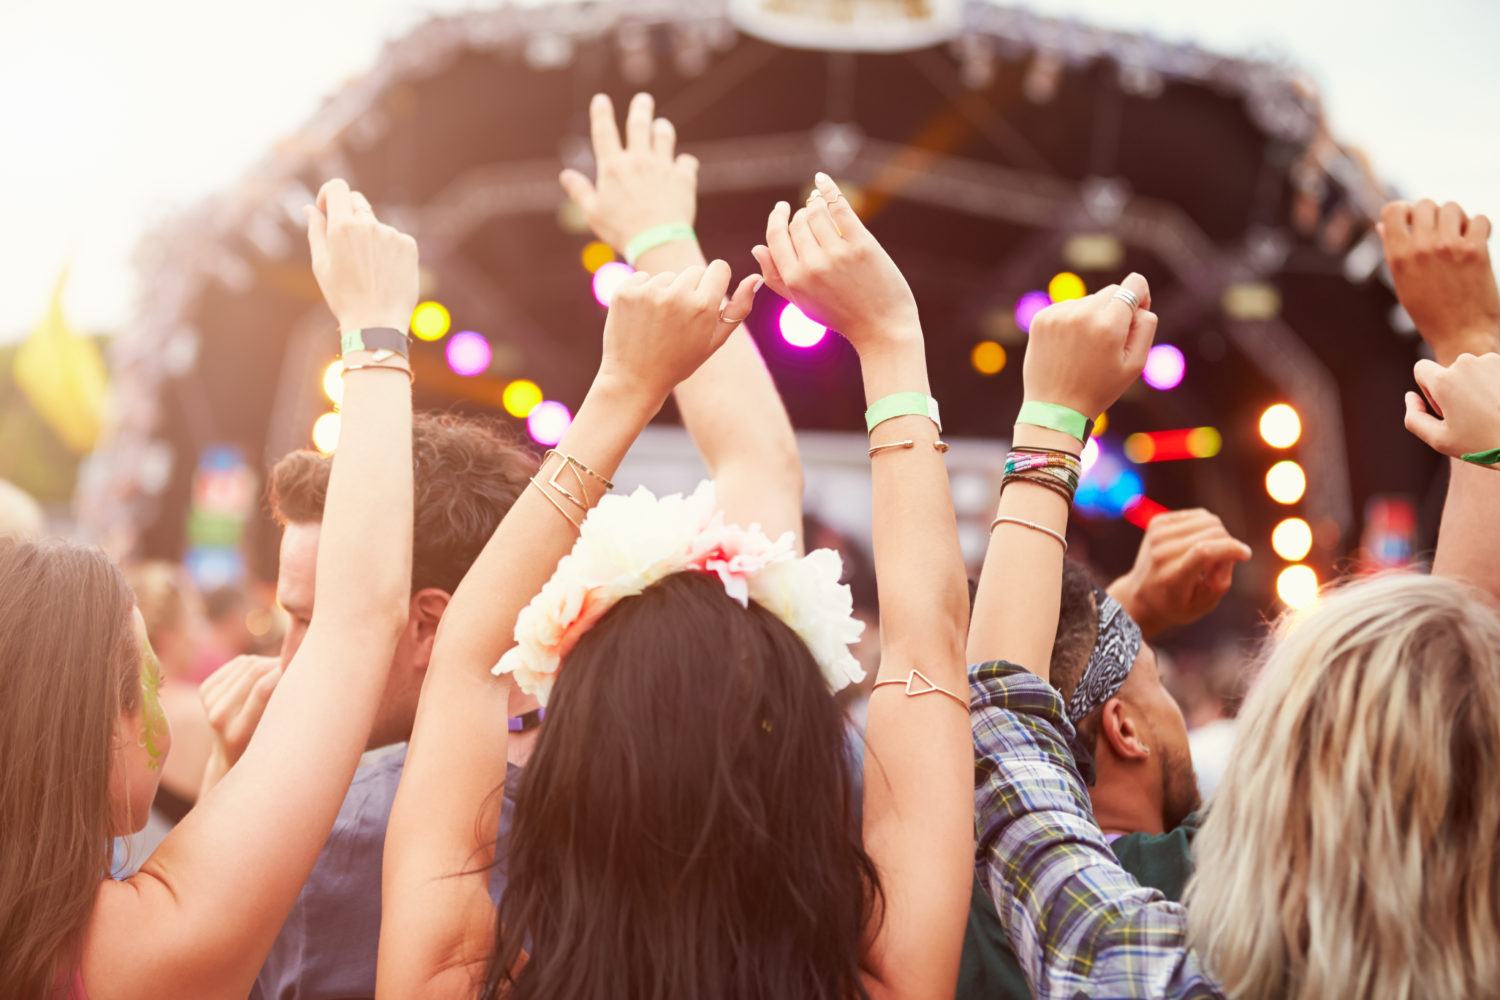 Here's what you need to know about the Hangout Music Festival.